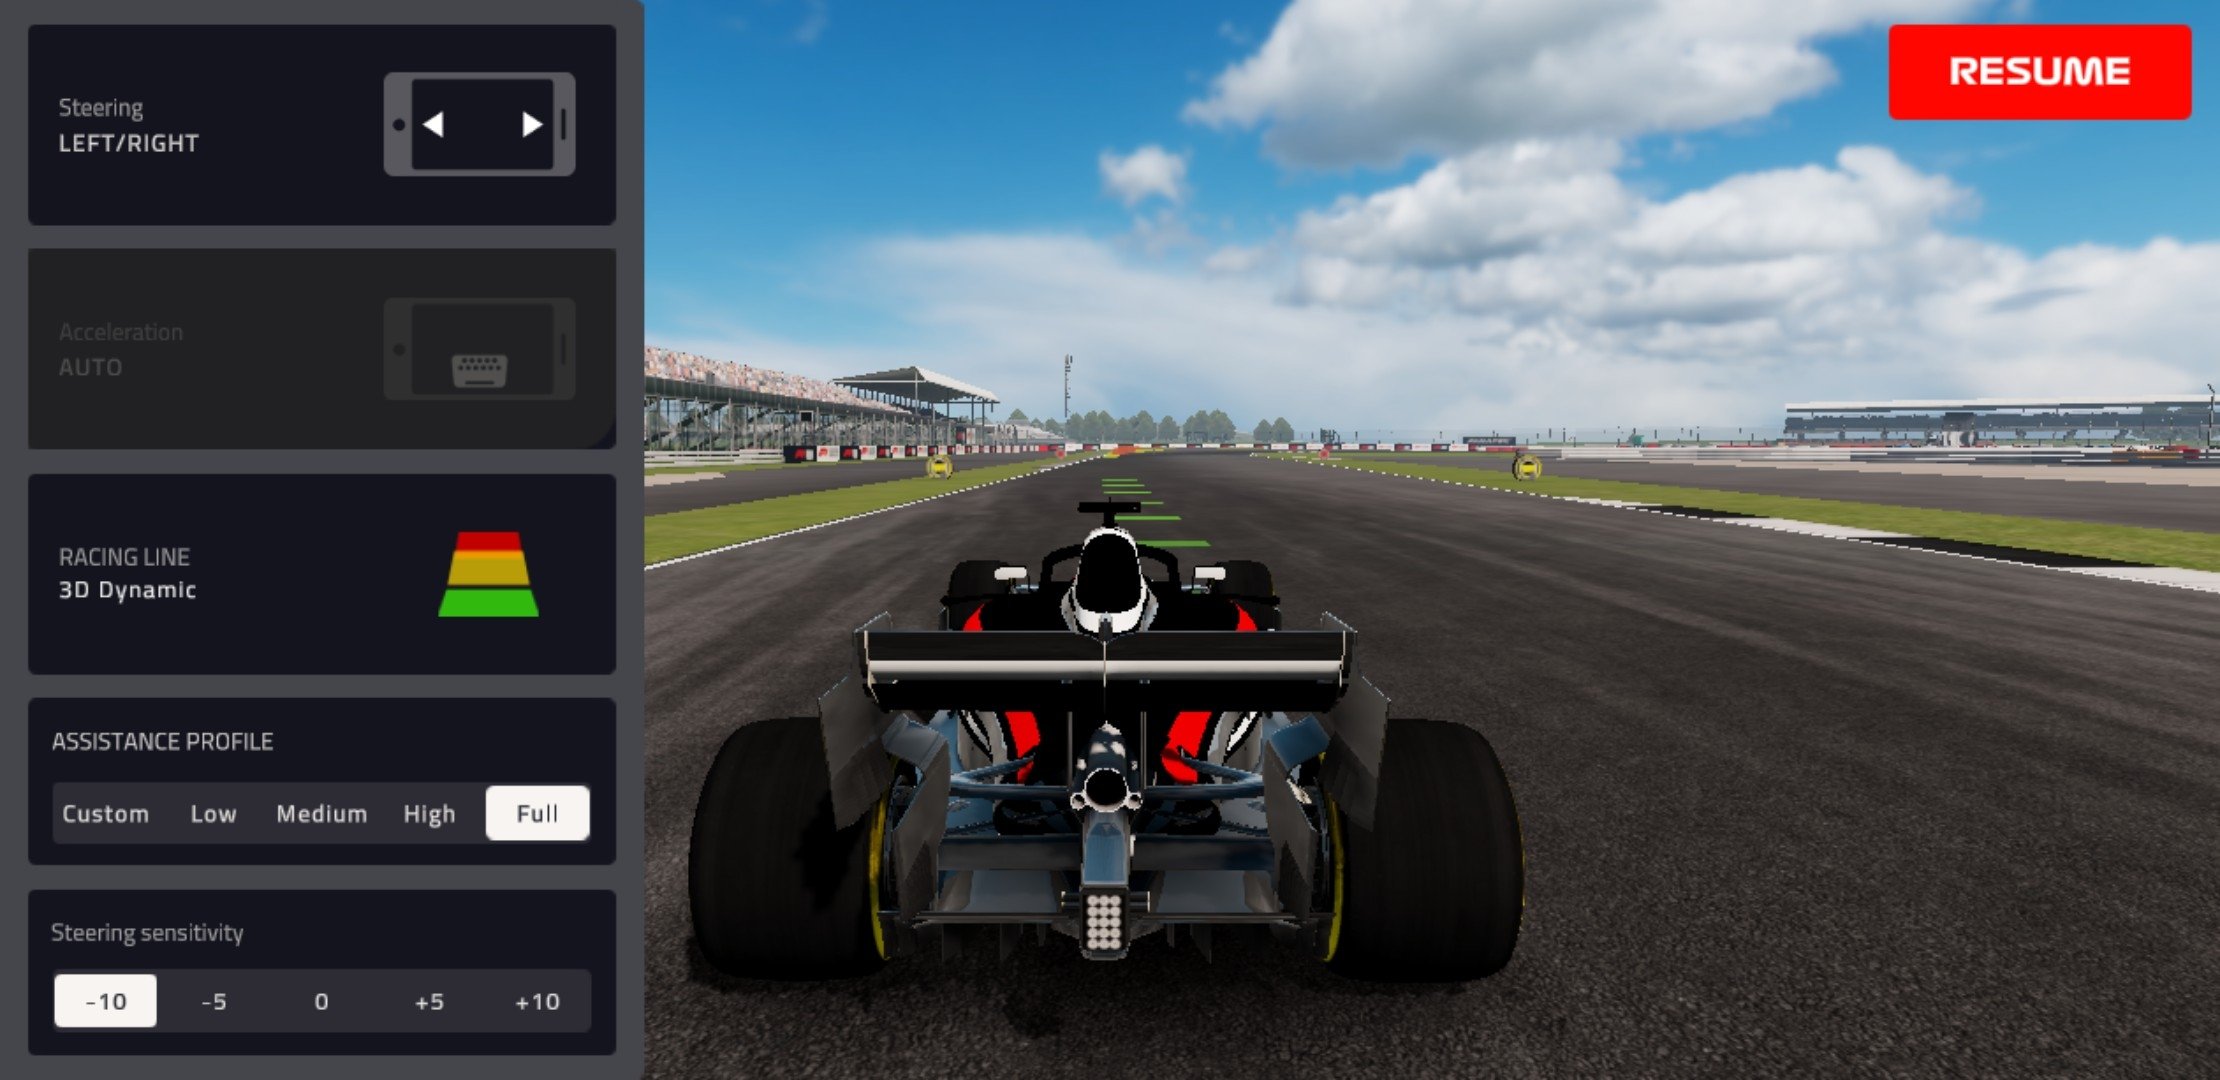 F1 Mobile Racing APK download - F1 Mobile Racing for Android Free